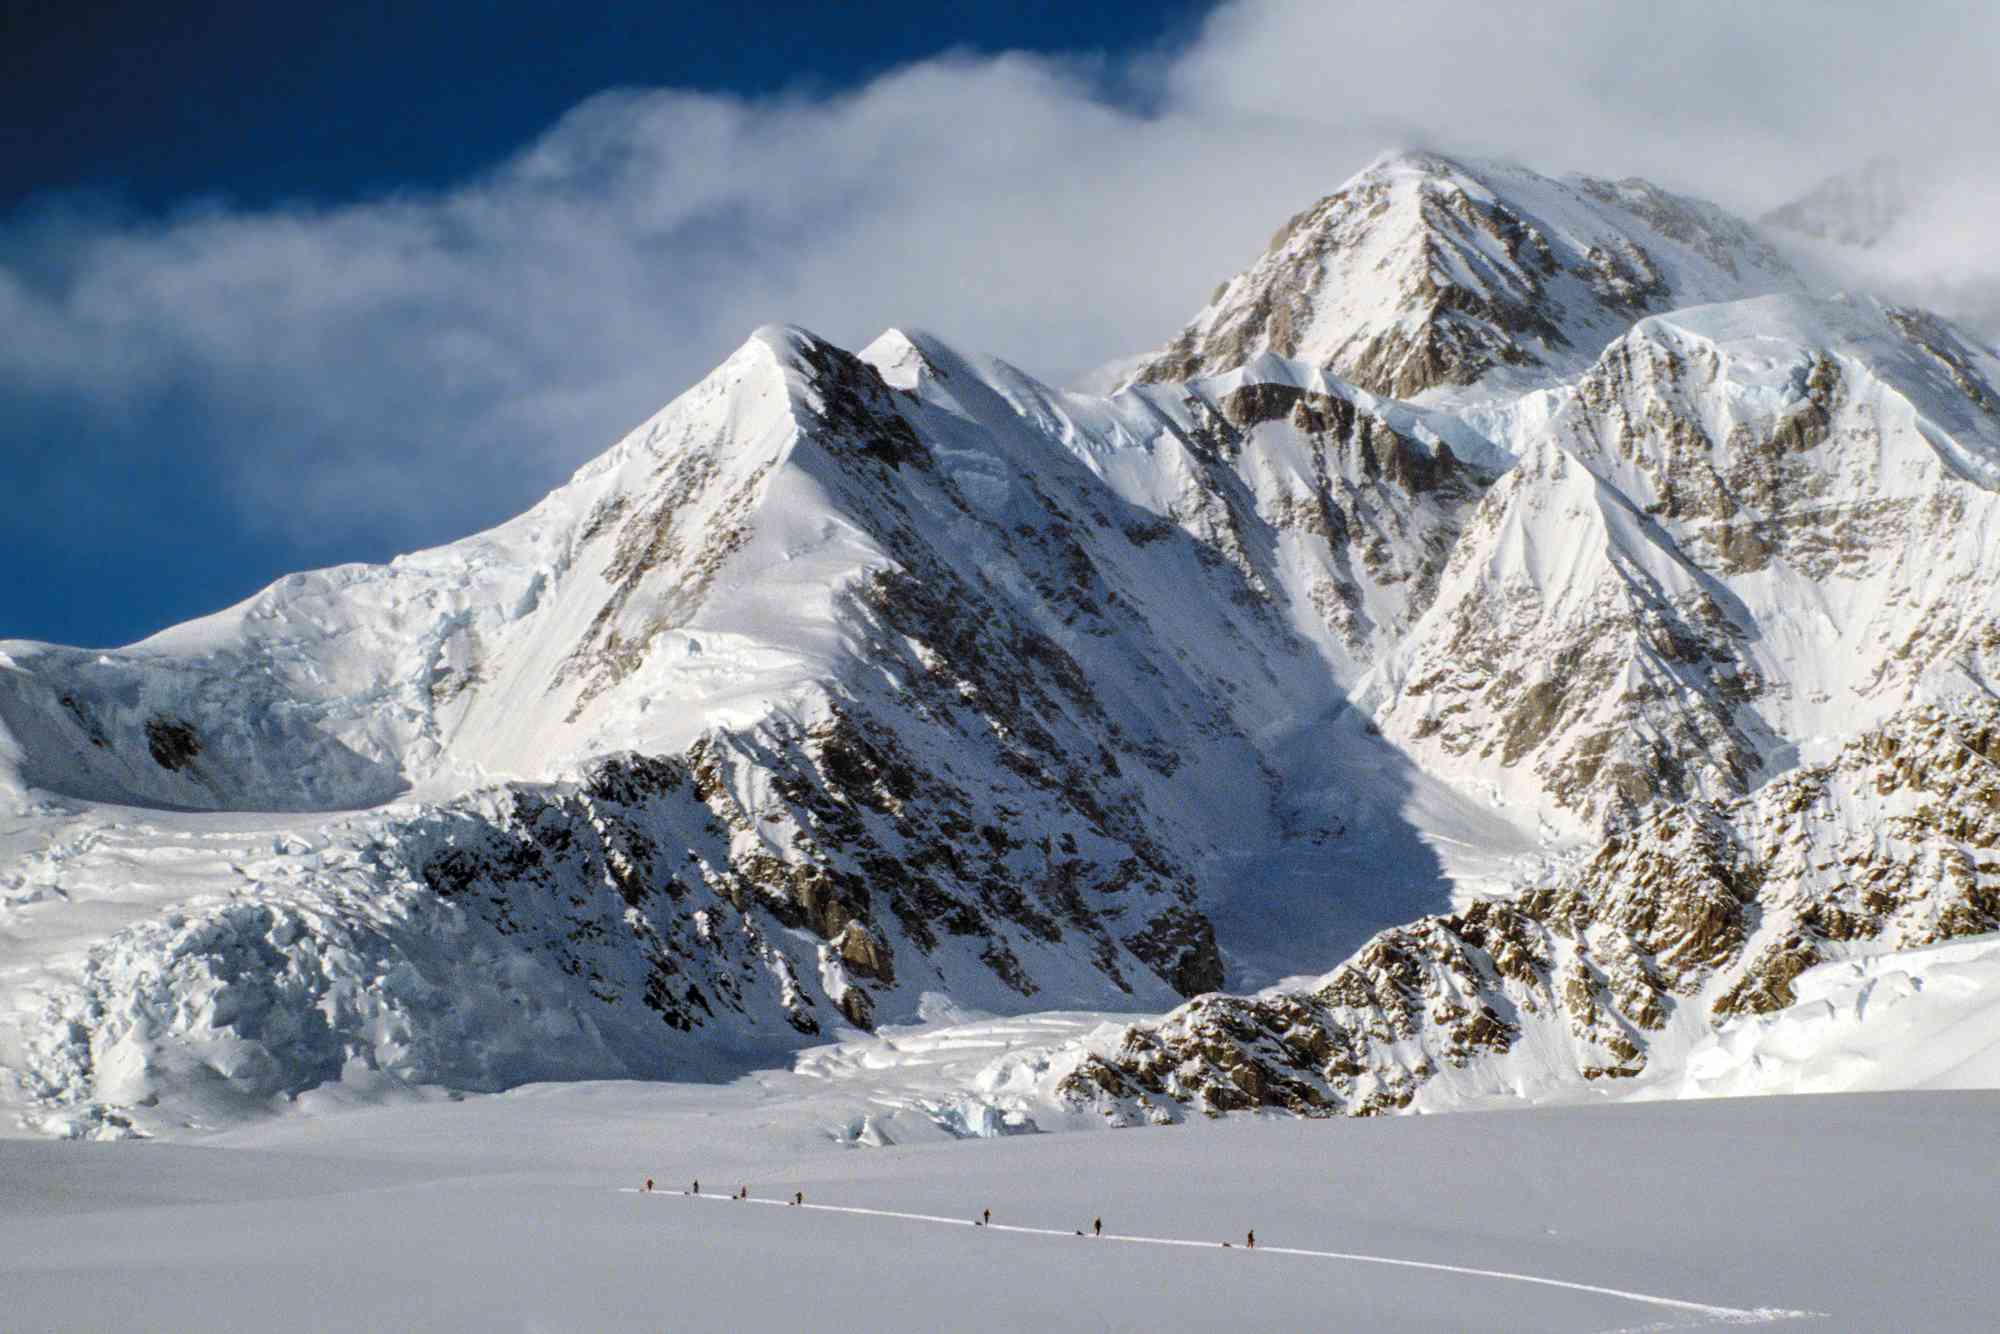 Solo Climber from Japan Found Dead at 17,000 Feet After Falling on Alaska's Mt. Denali